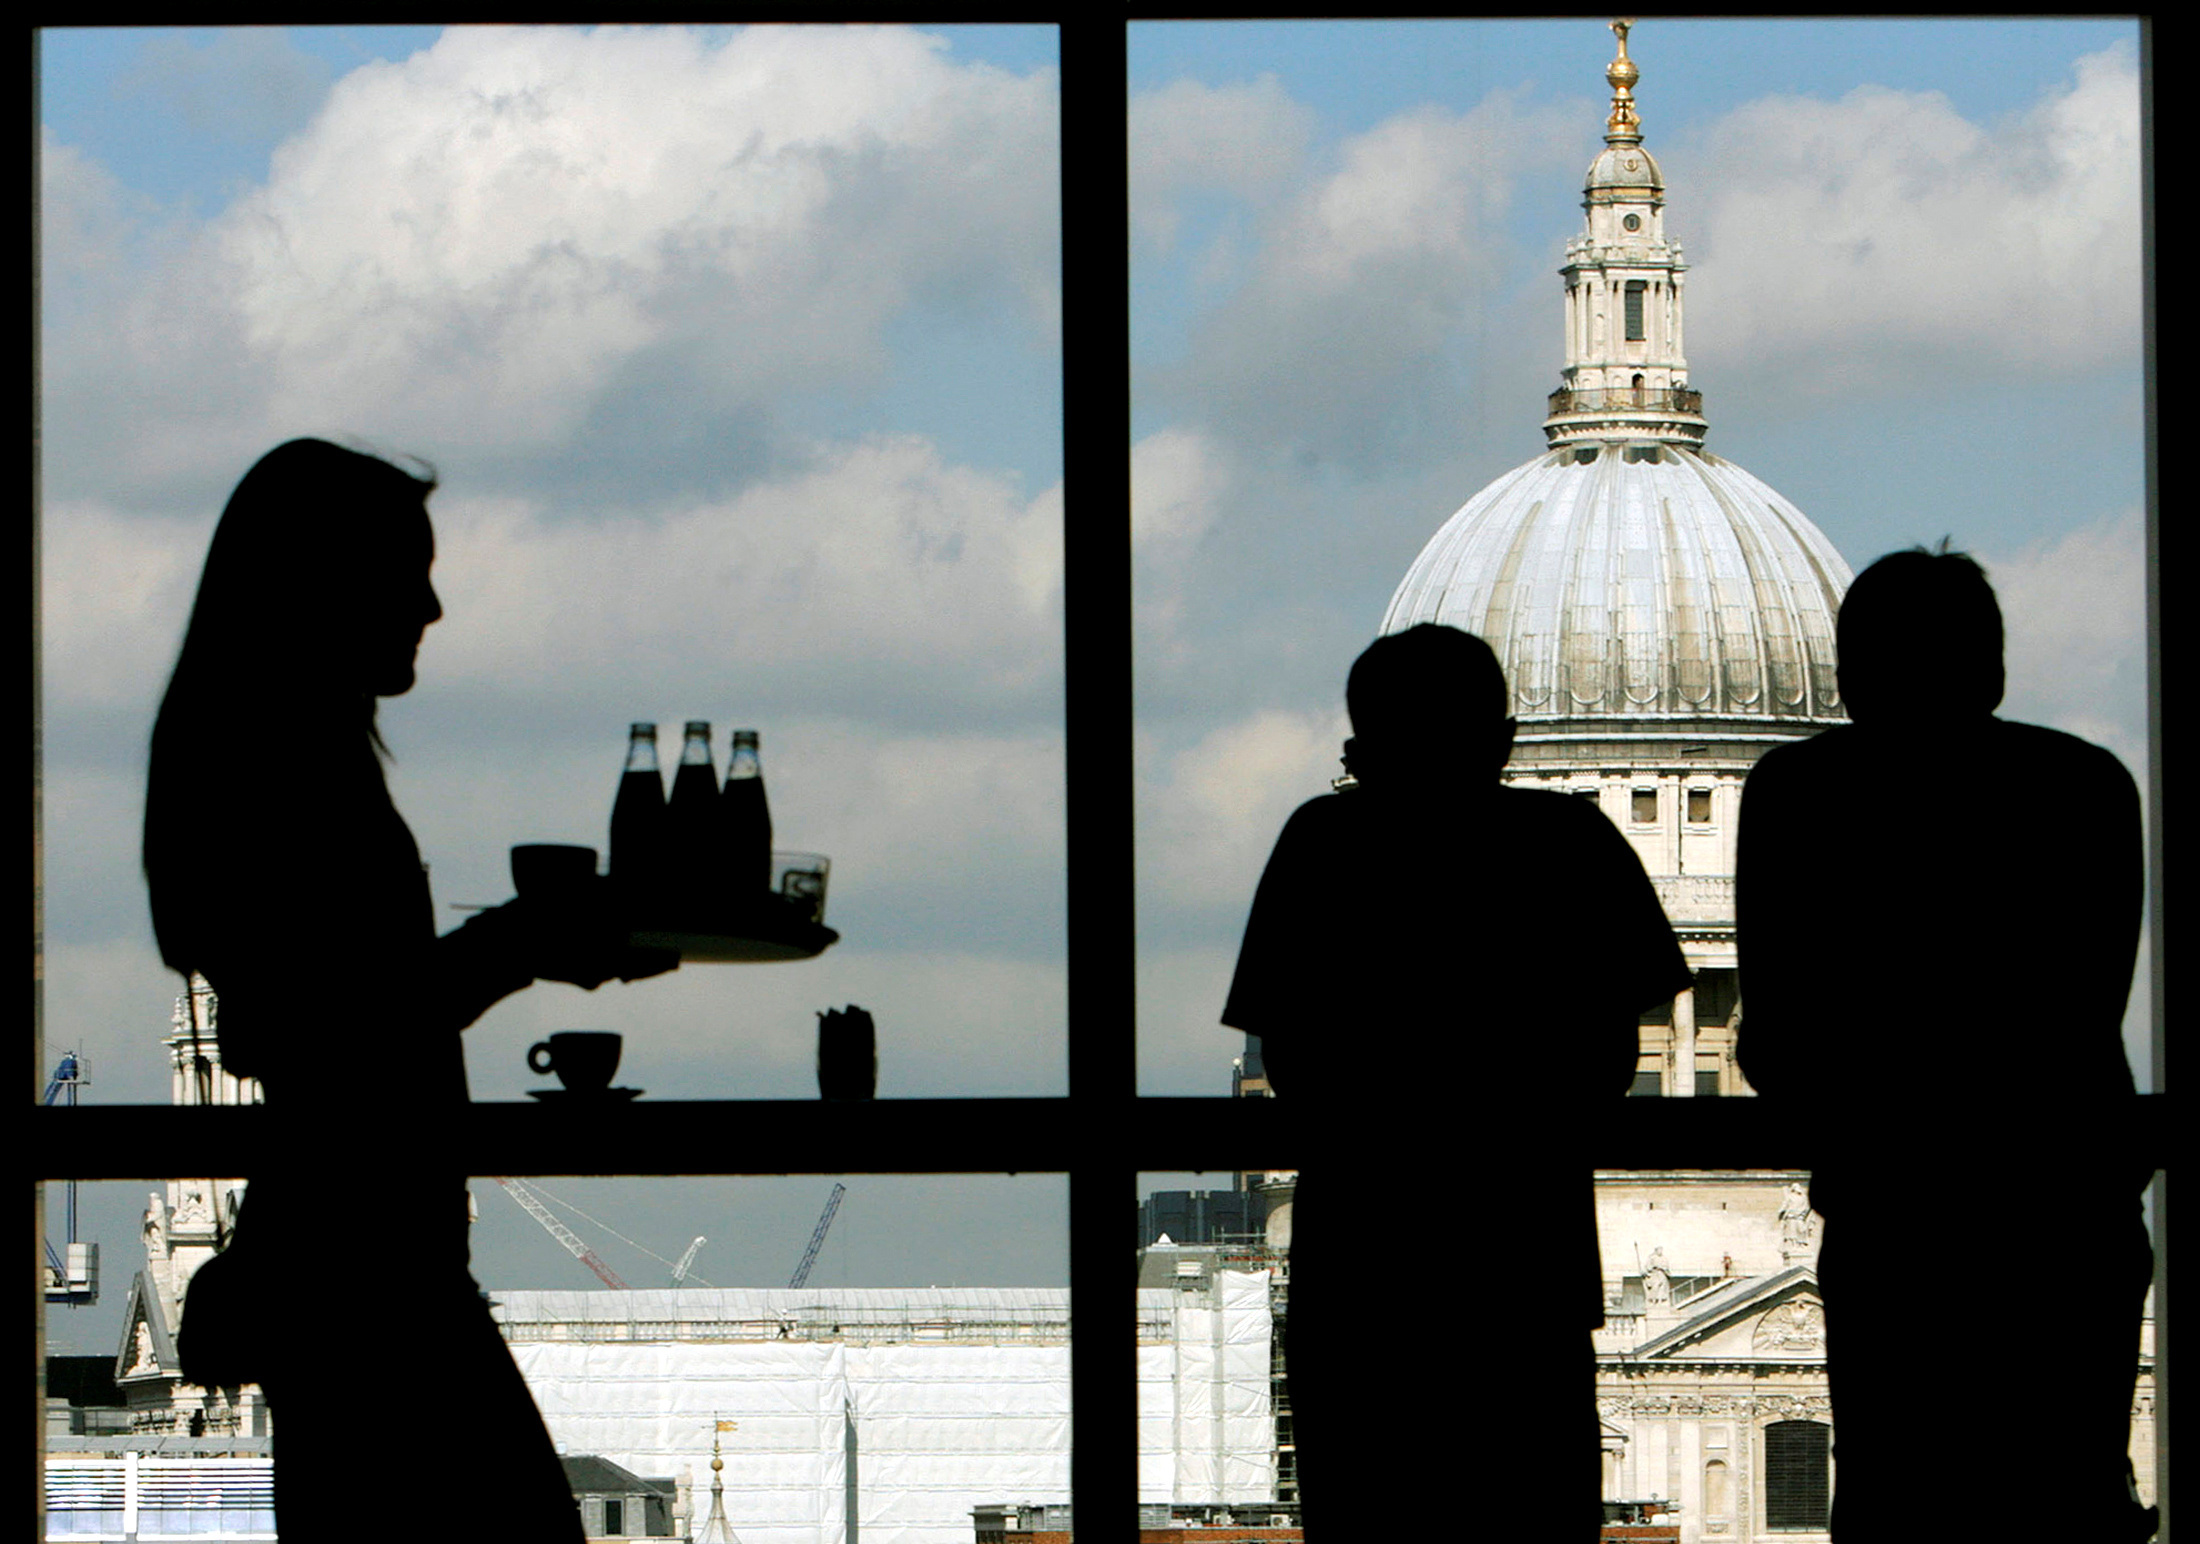 Visitors admire St. Paul's Cathedral from the restaurant floor of the Tate Modern gallery in London